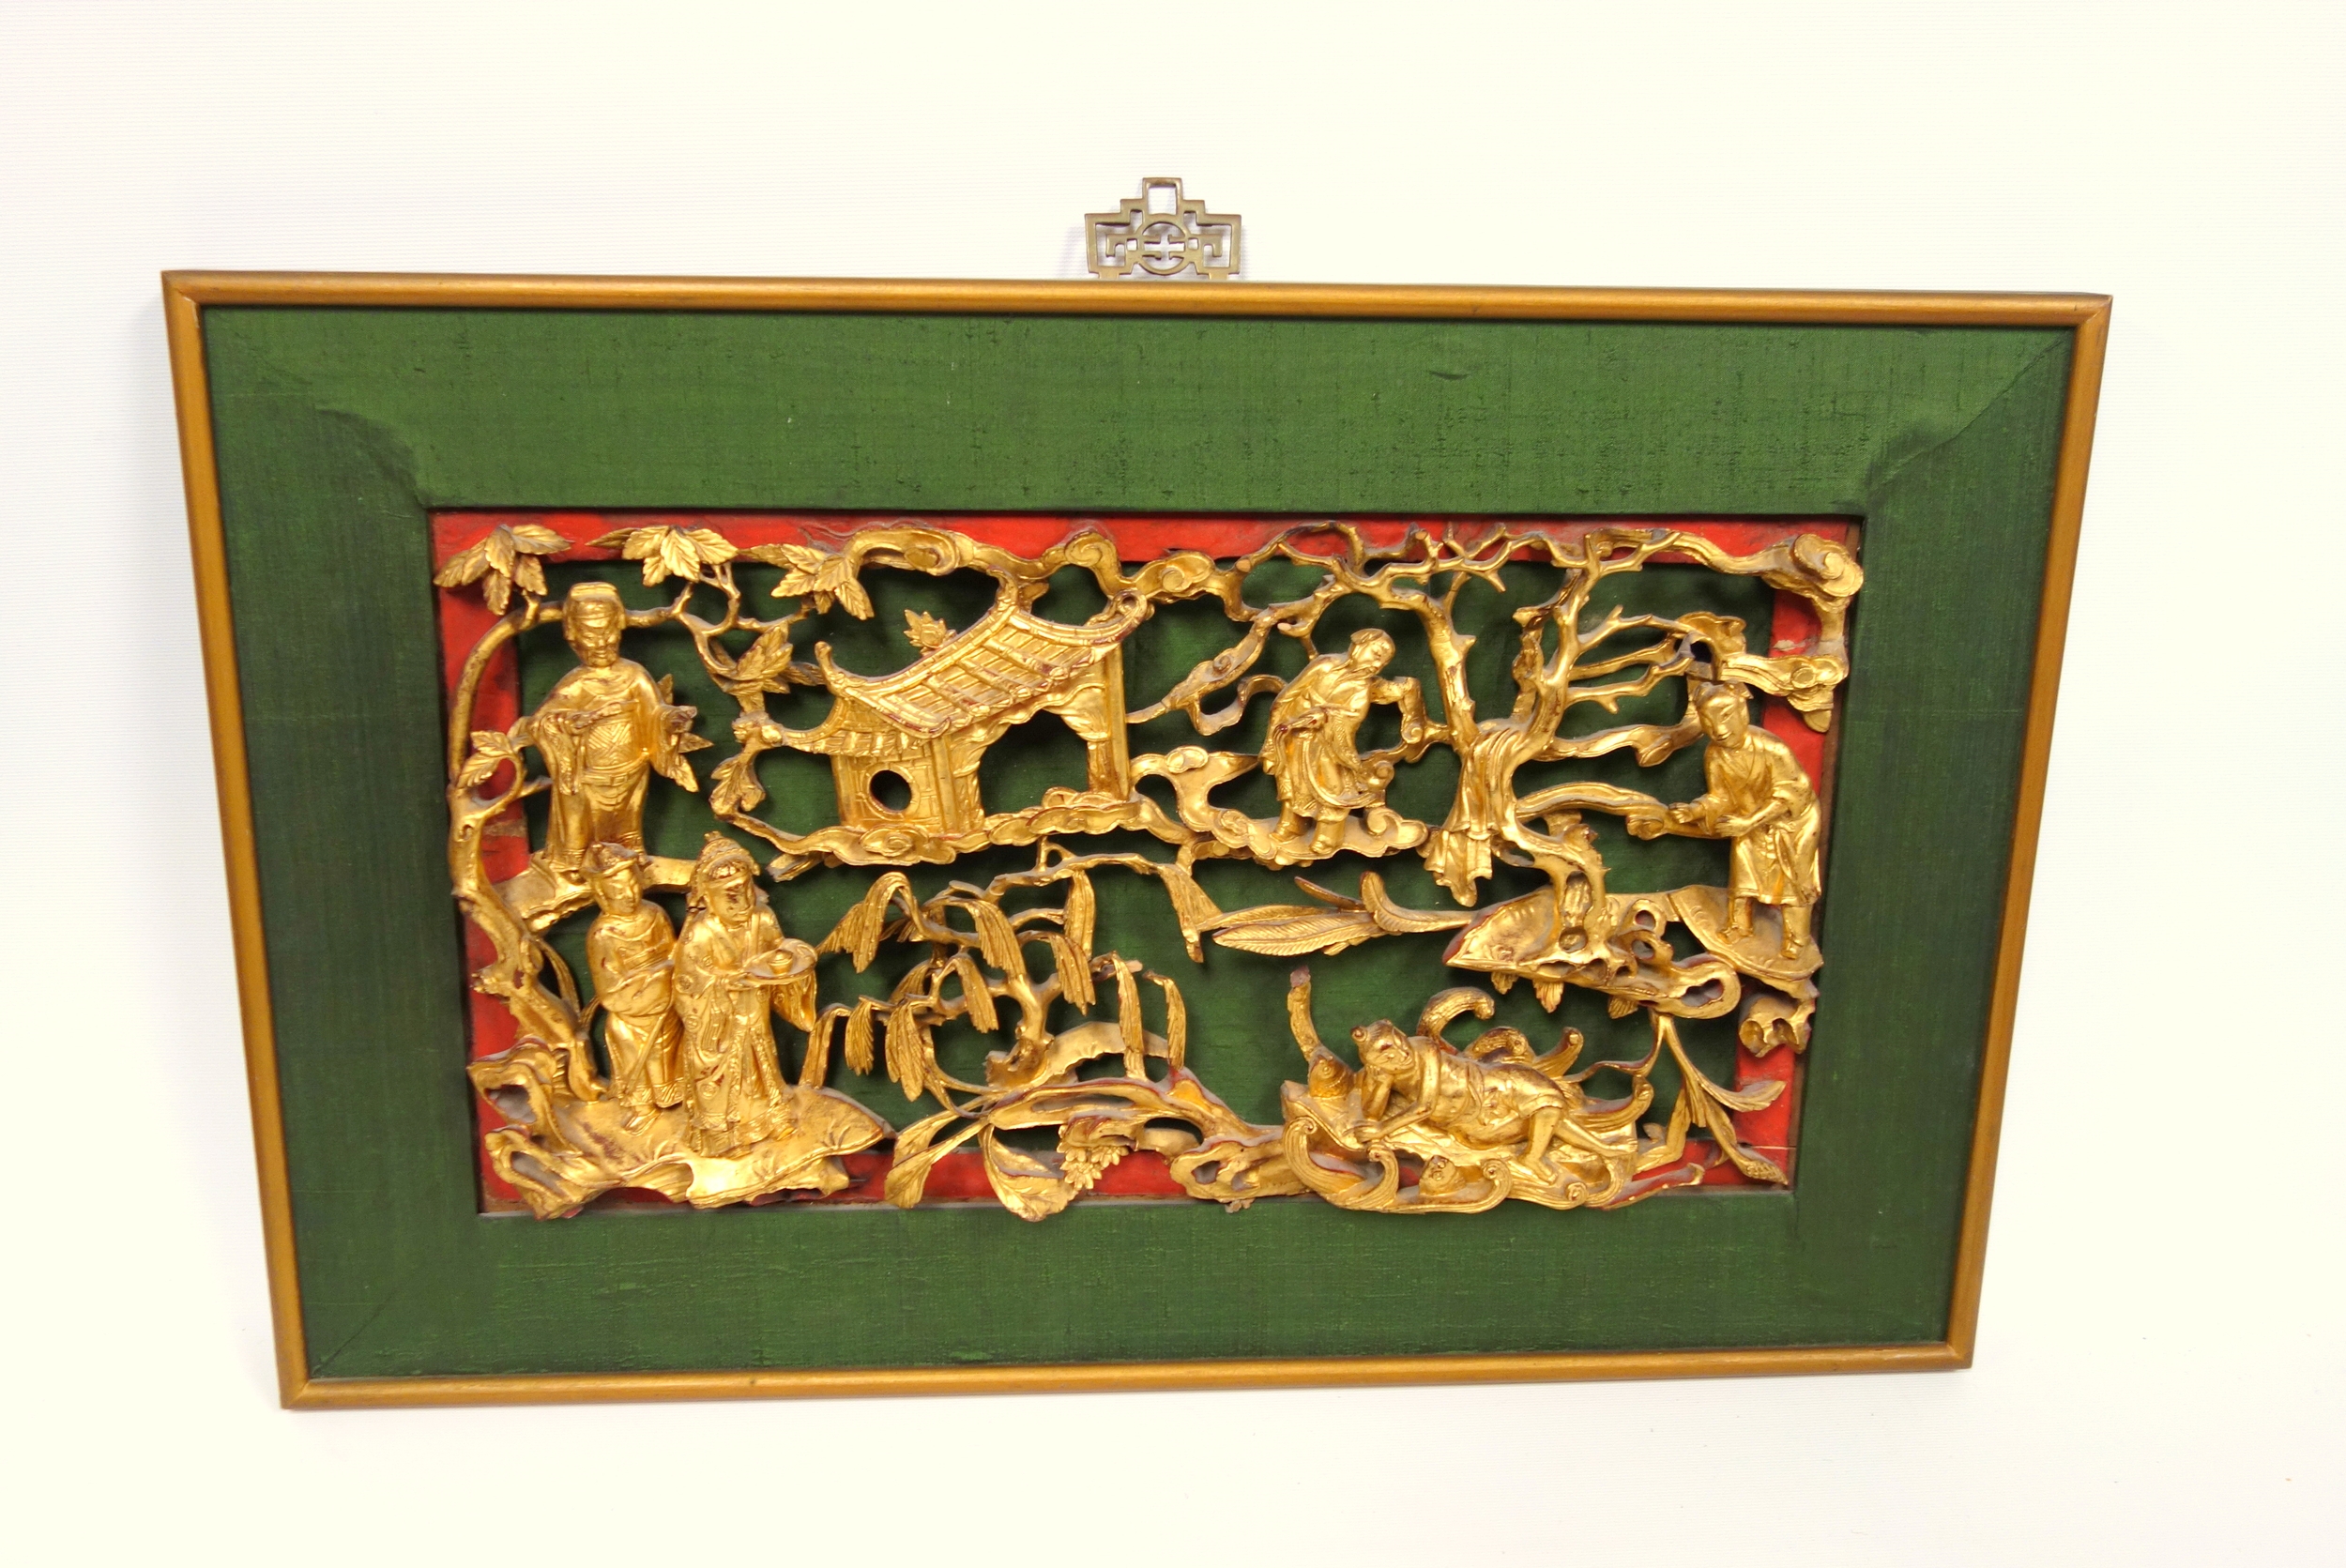 Chinese carved and pierced wood panel with figures, buildings, flowers and foliage, 23.5 x 4.5cm, (